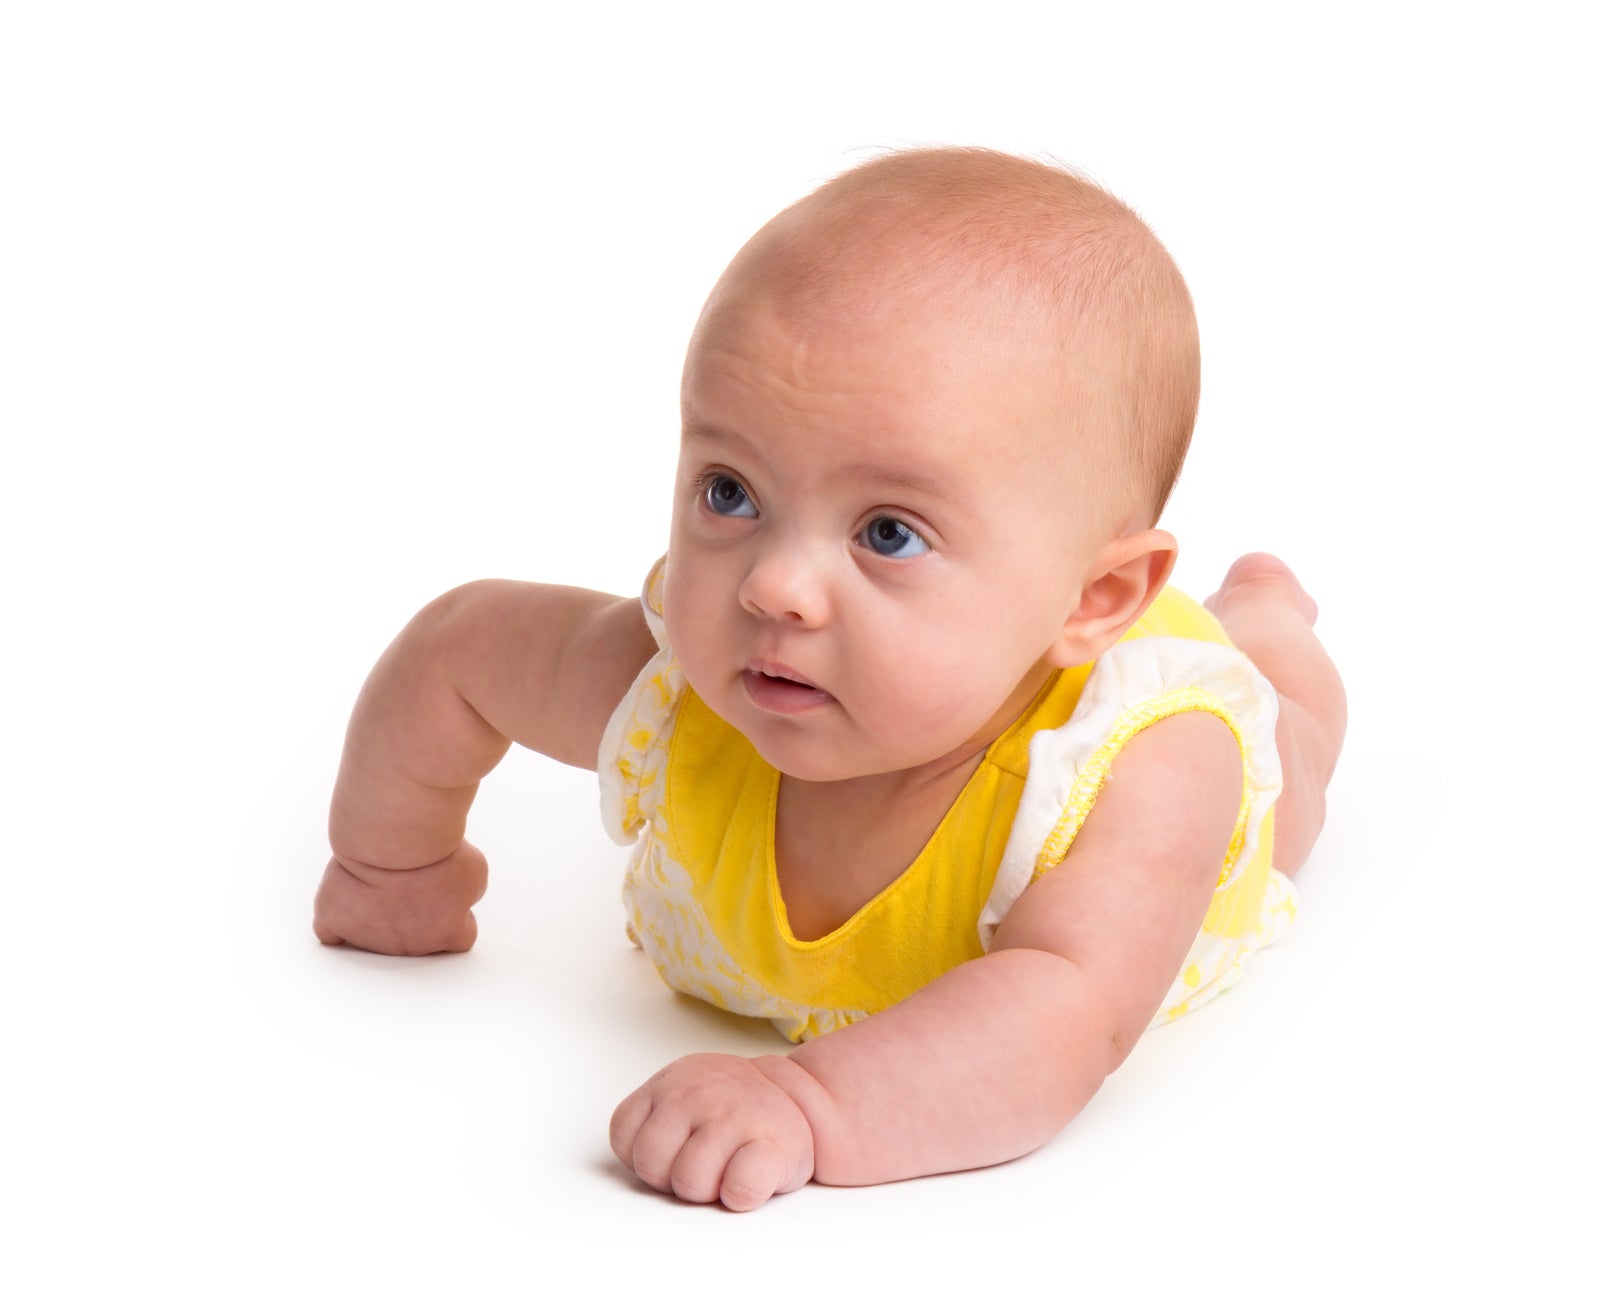 Are You Doing Tummy Time Correctly With Your Baby?